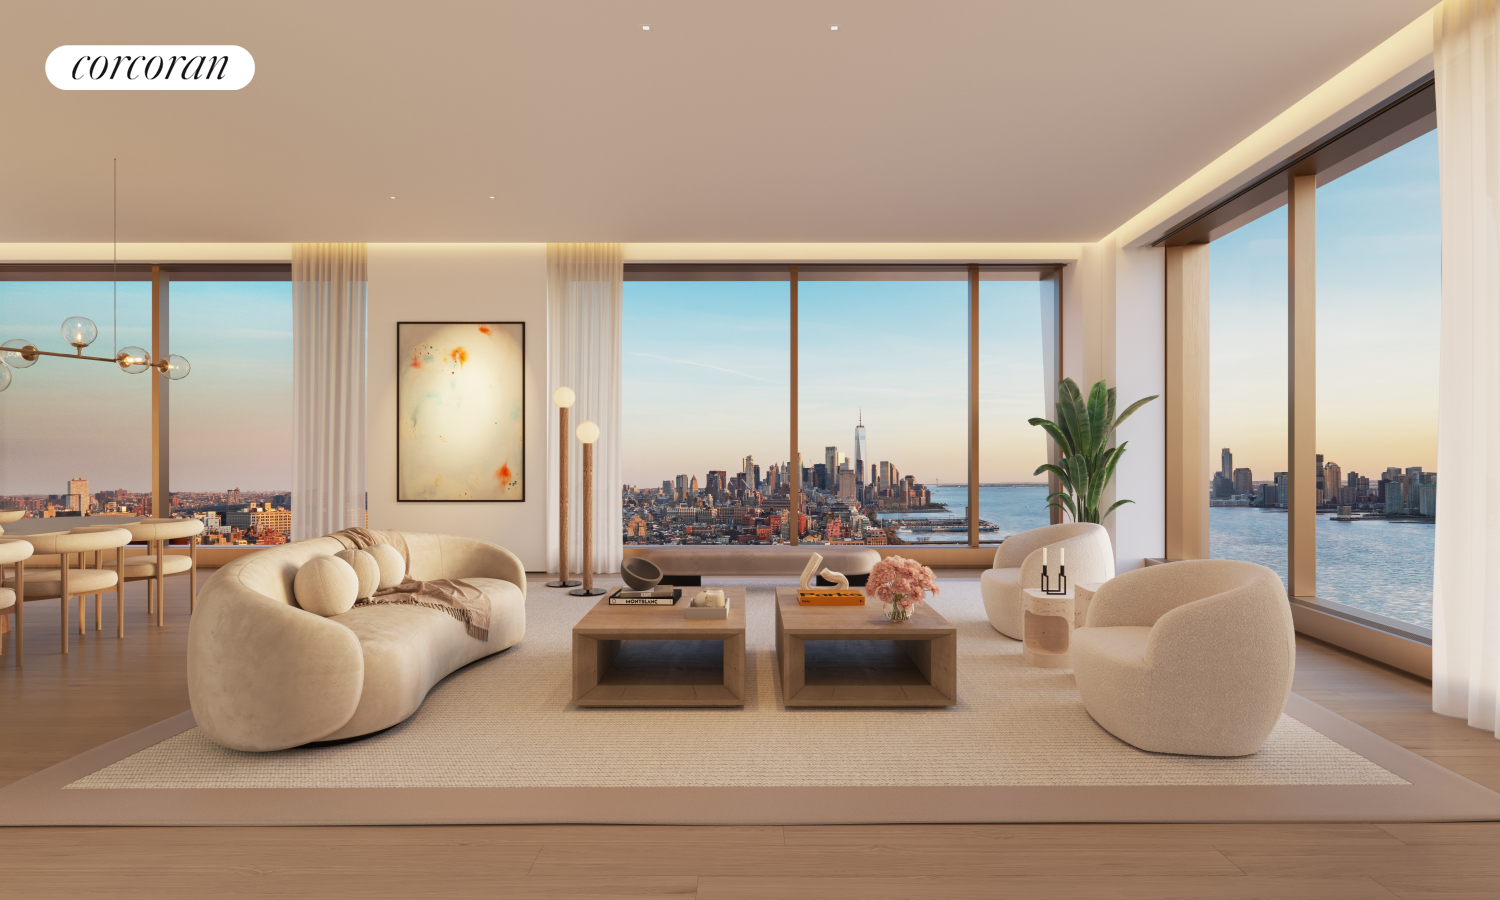 500 West 18th Street West 20A, Chelsea, Downtown, NYC - 3 Bedrooms  
3.5 Bathrooms  
6 Rooms - 